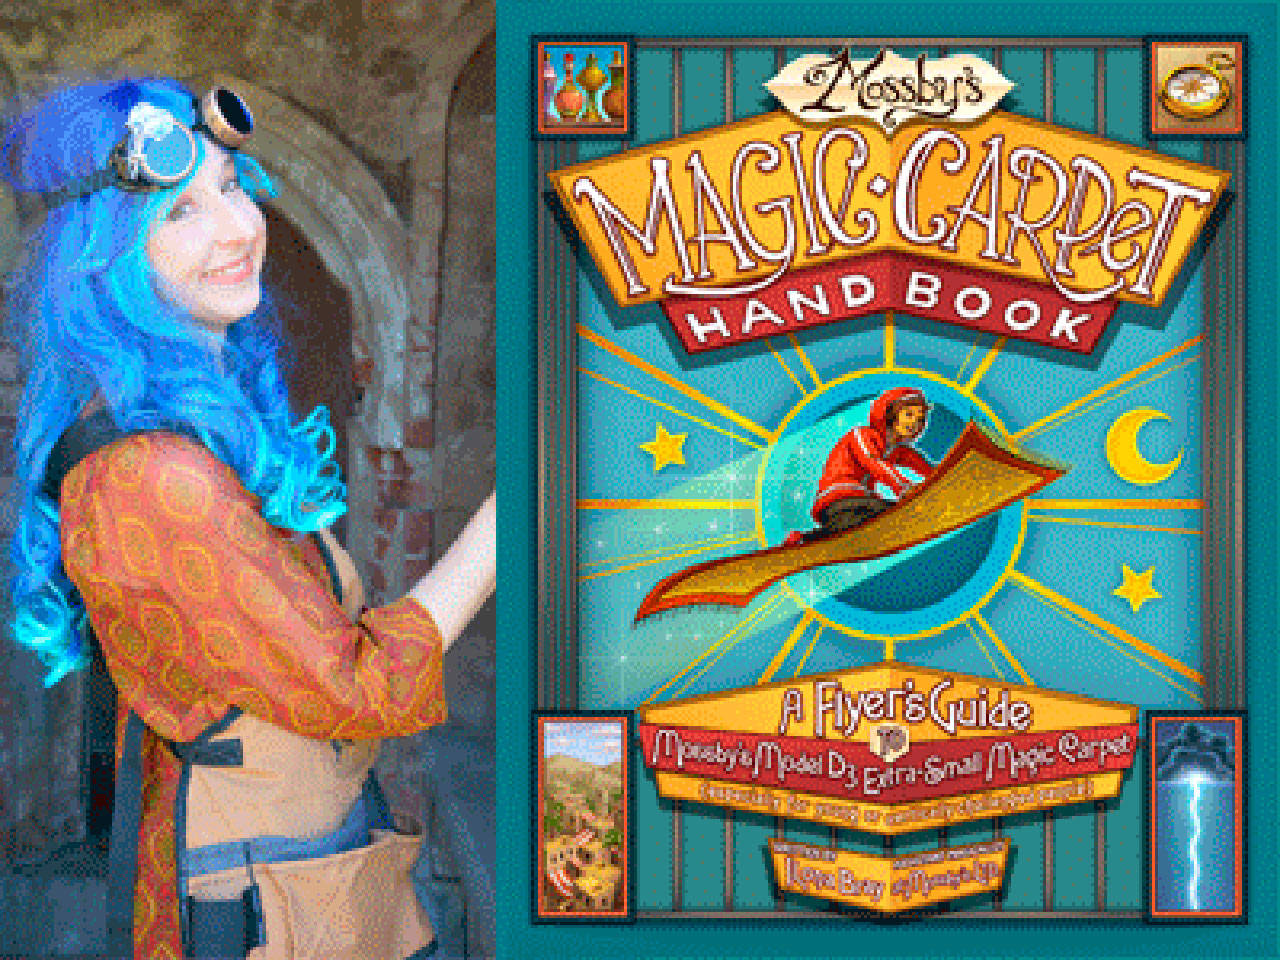 Image courtesy of Eagle Harbor Book Company | Ilona Bray will visit Eagle Harbor Book Company at 11 a.m. Saturday, Oct. 14 to discuss her new children’s’ book “Mossby’s Magic Carpet Handbook: A Flyer’s Guide to Mossby’s Model D3 Extra Small Magic Carpet (Especially for Young or Vertically Challenged People).”